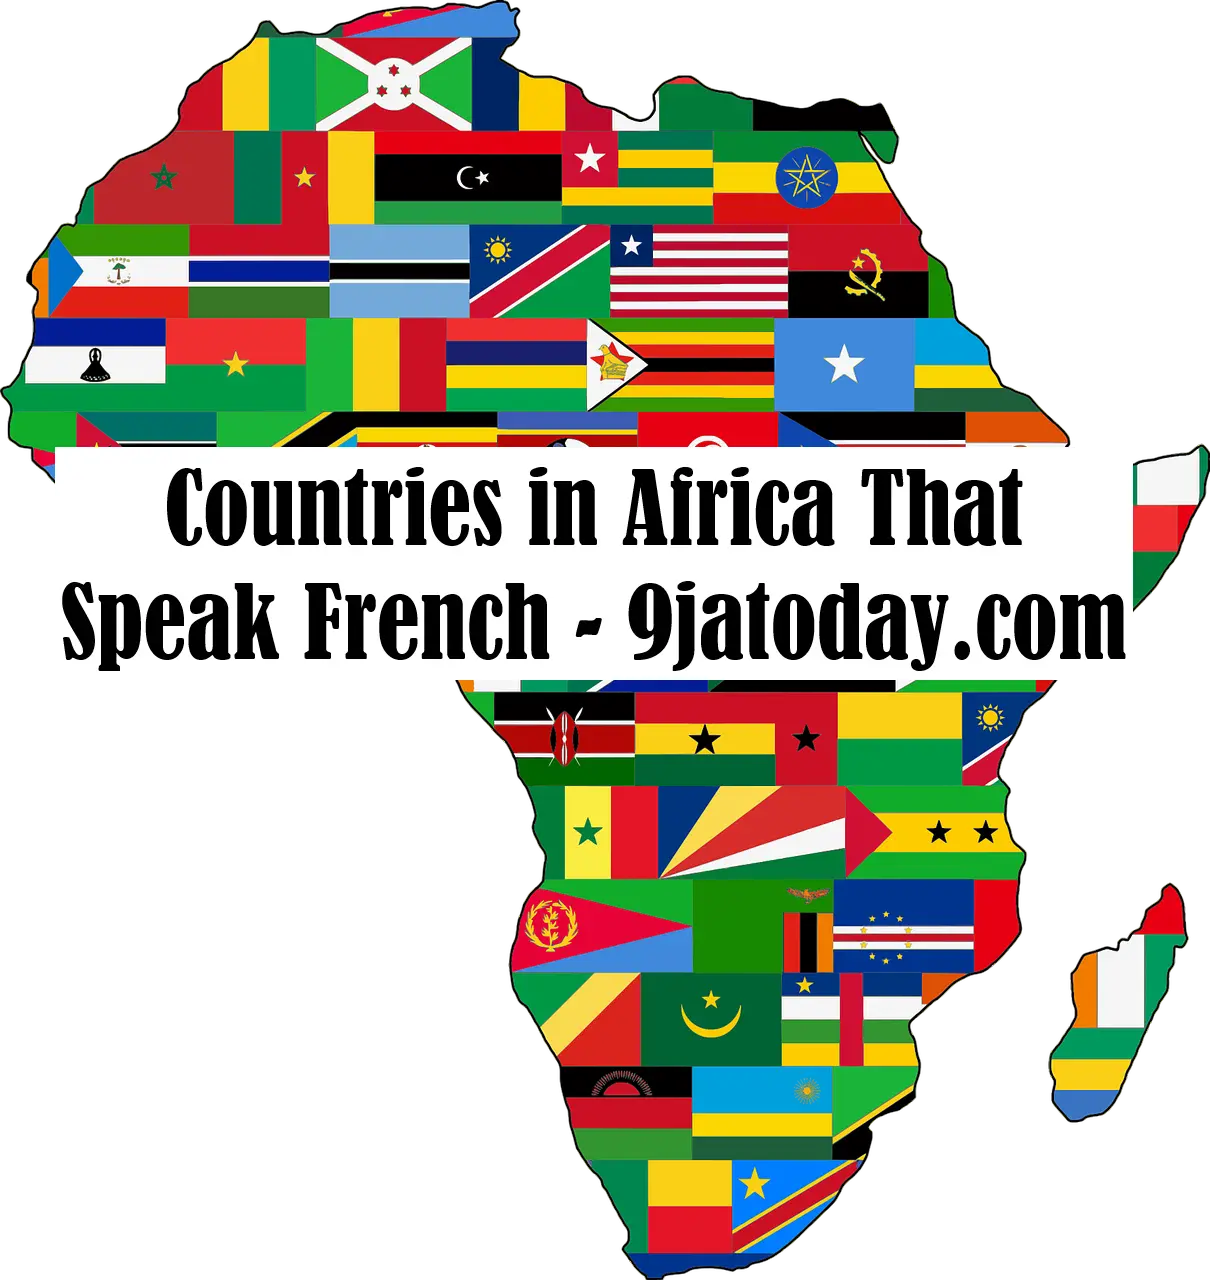 Countries in Africa That Speak French